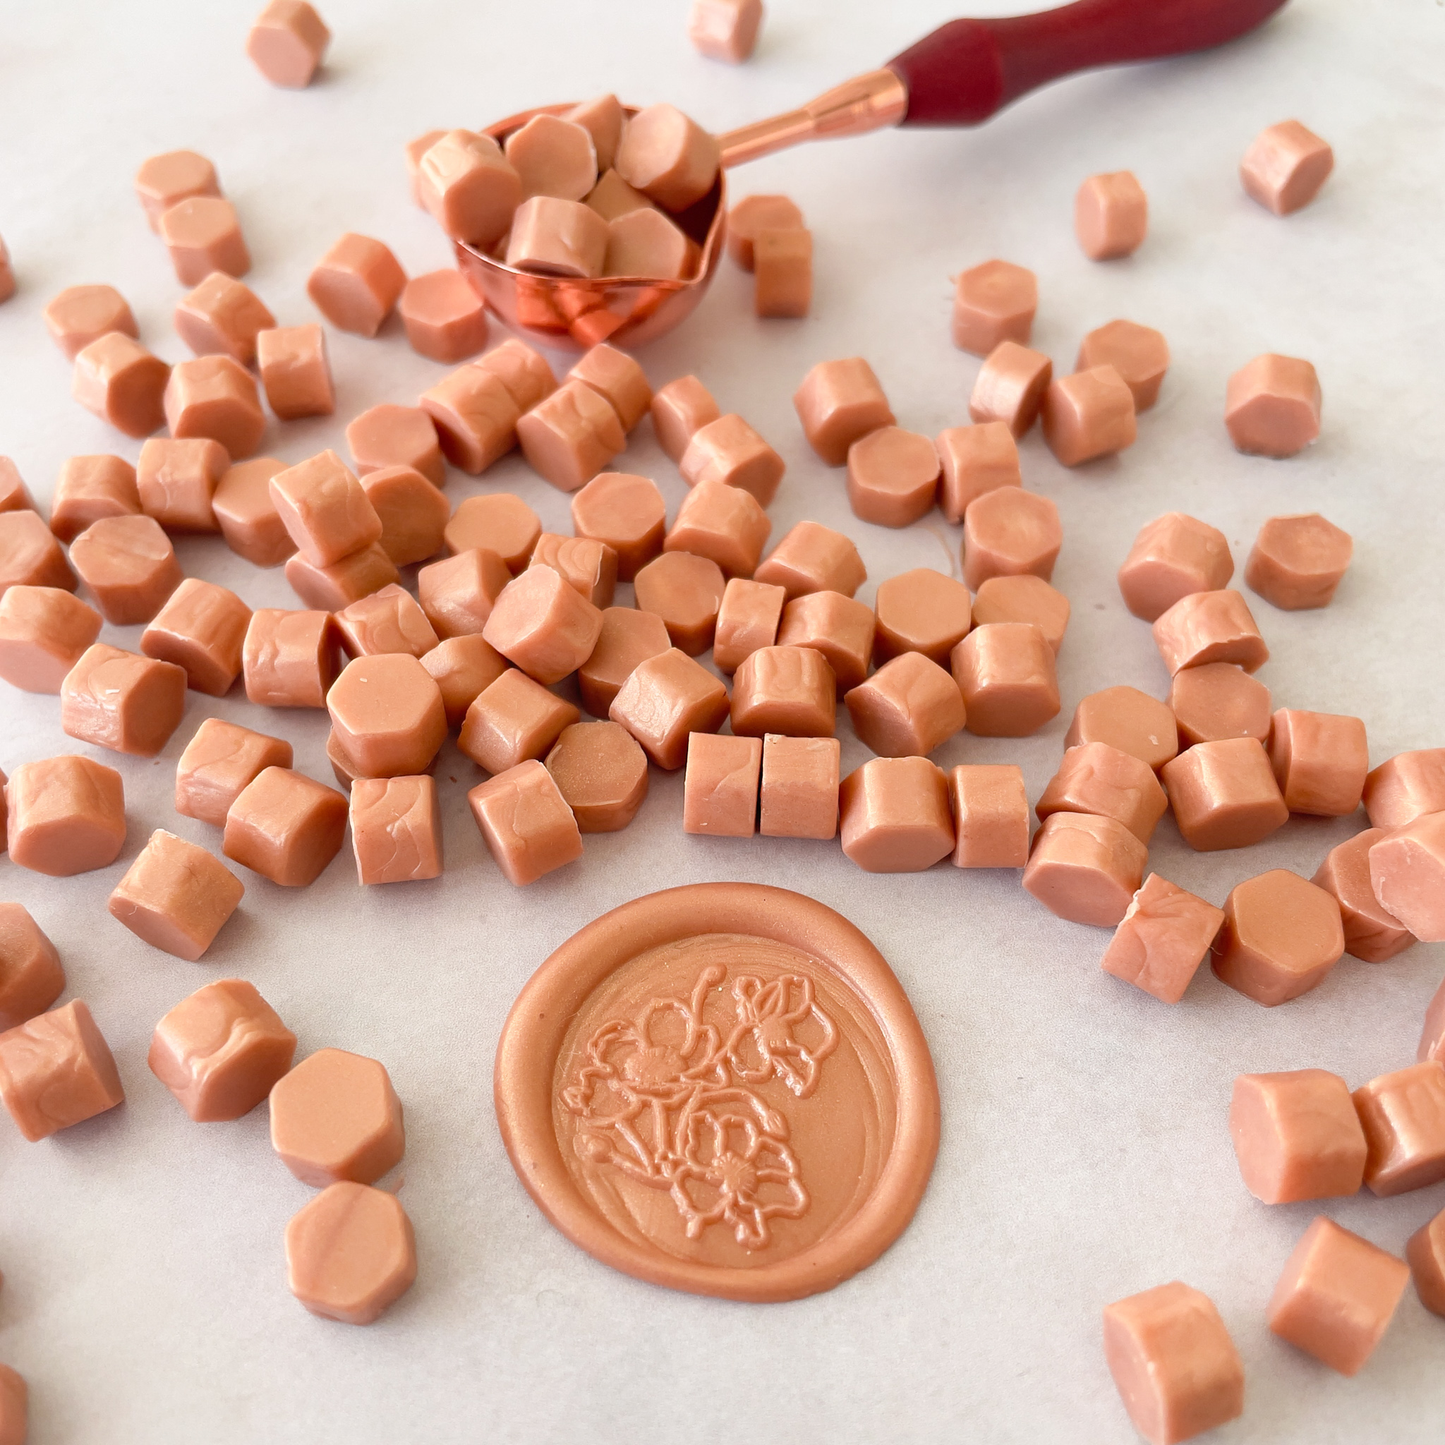 rose gold sealing wax beads.  Small beads of wax in pearlised rose gold colour.  Perfect to make envelope seals, wax seals and wax stamps in rose gold colour